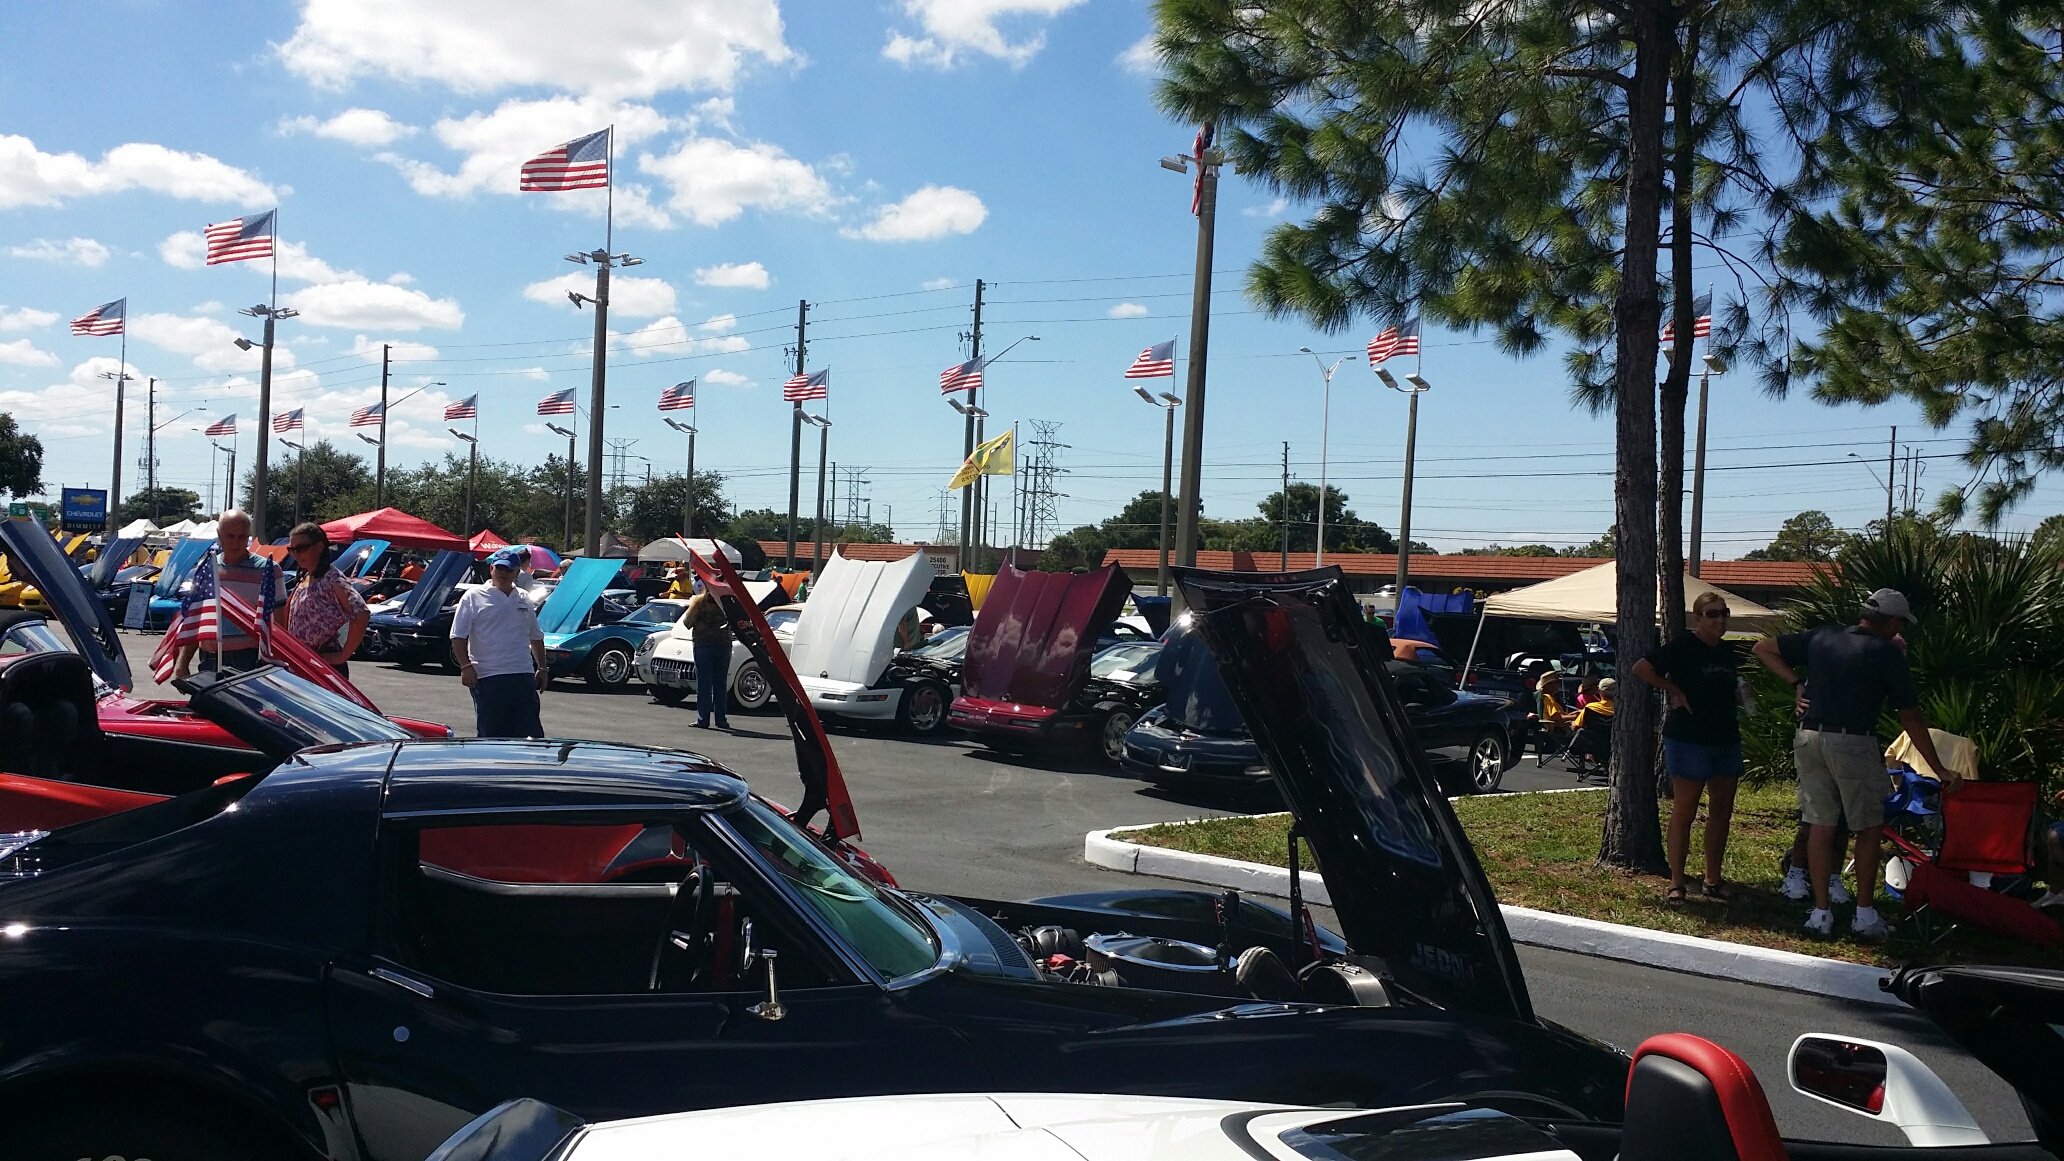 Dimmitt Chevrolet to host 18th annual Corvette show to benefit the Pediatric Cancer Foundation